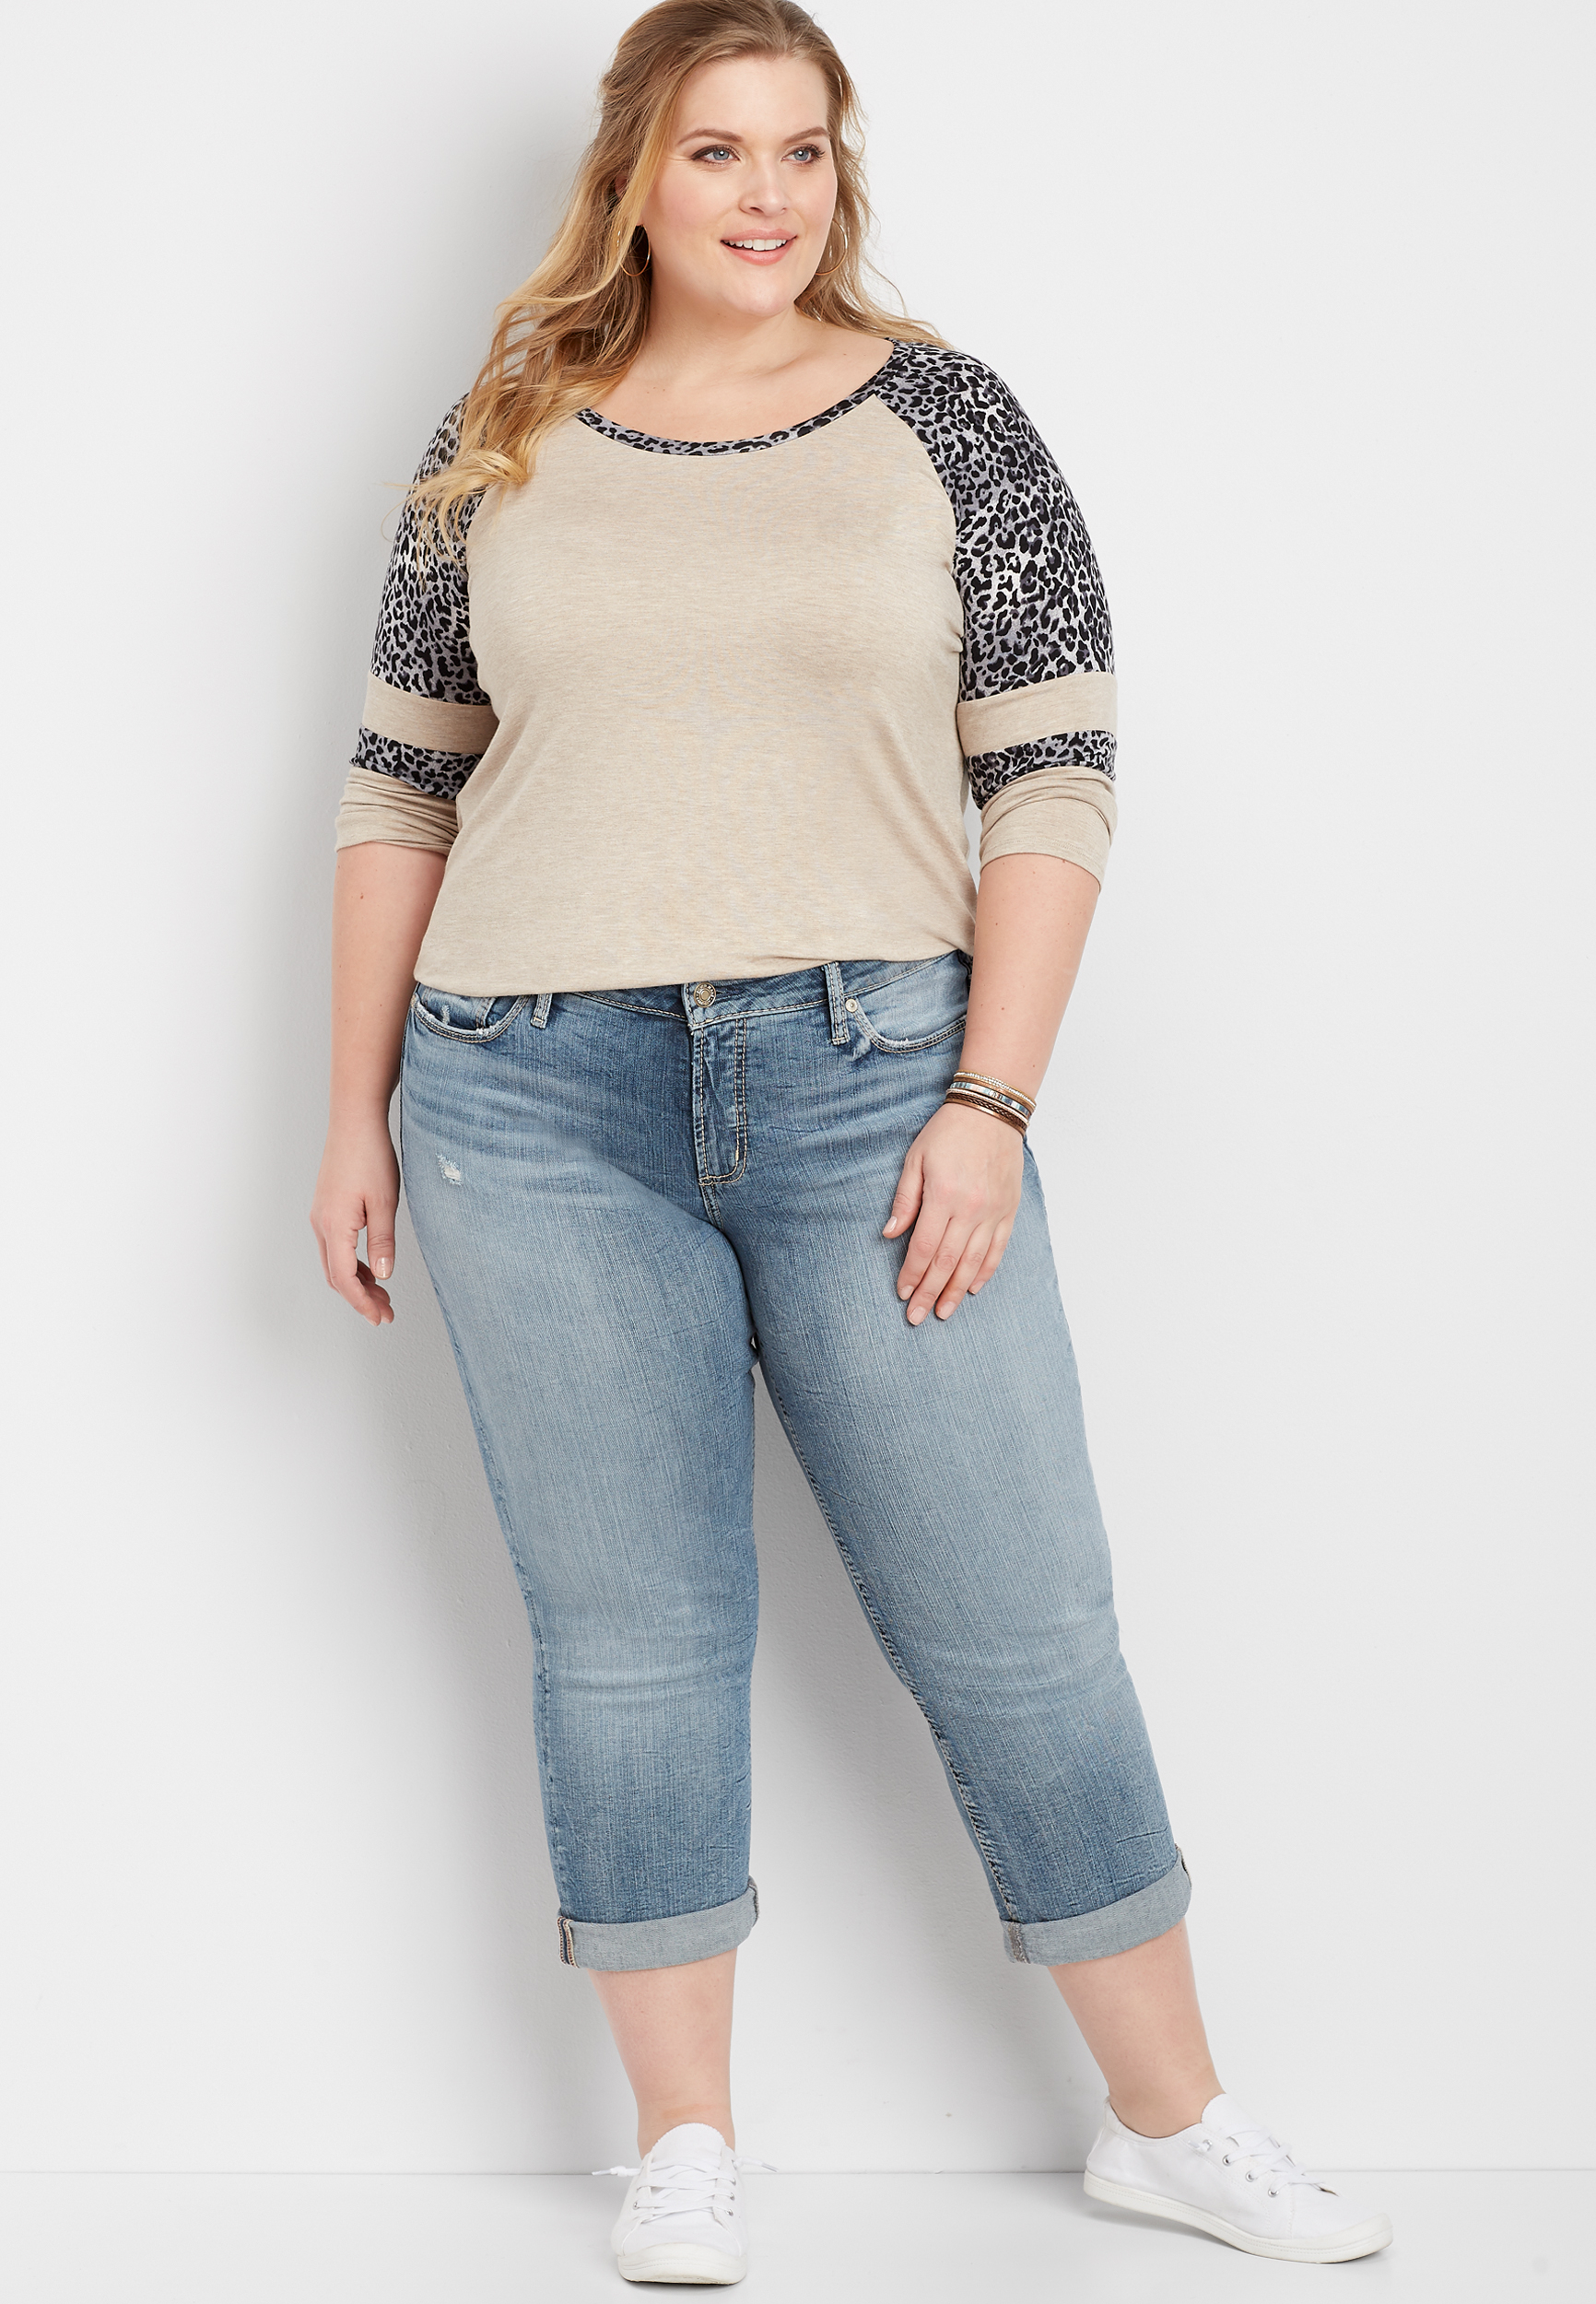 maurices silver jeans plus size